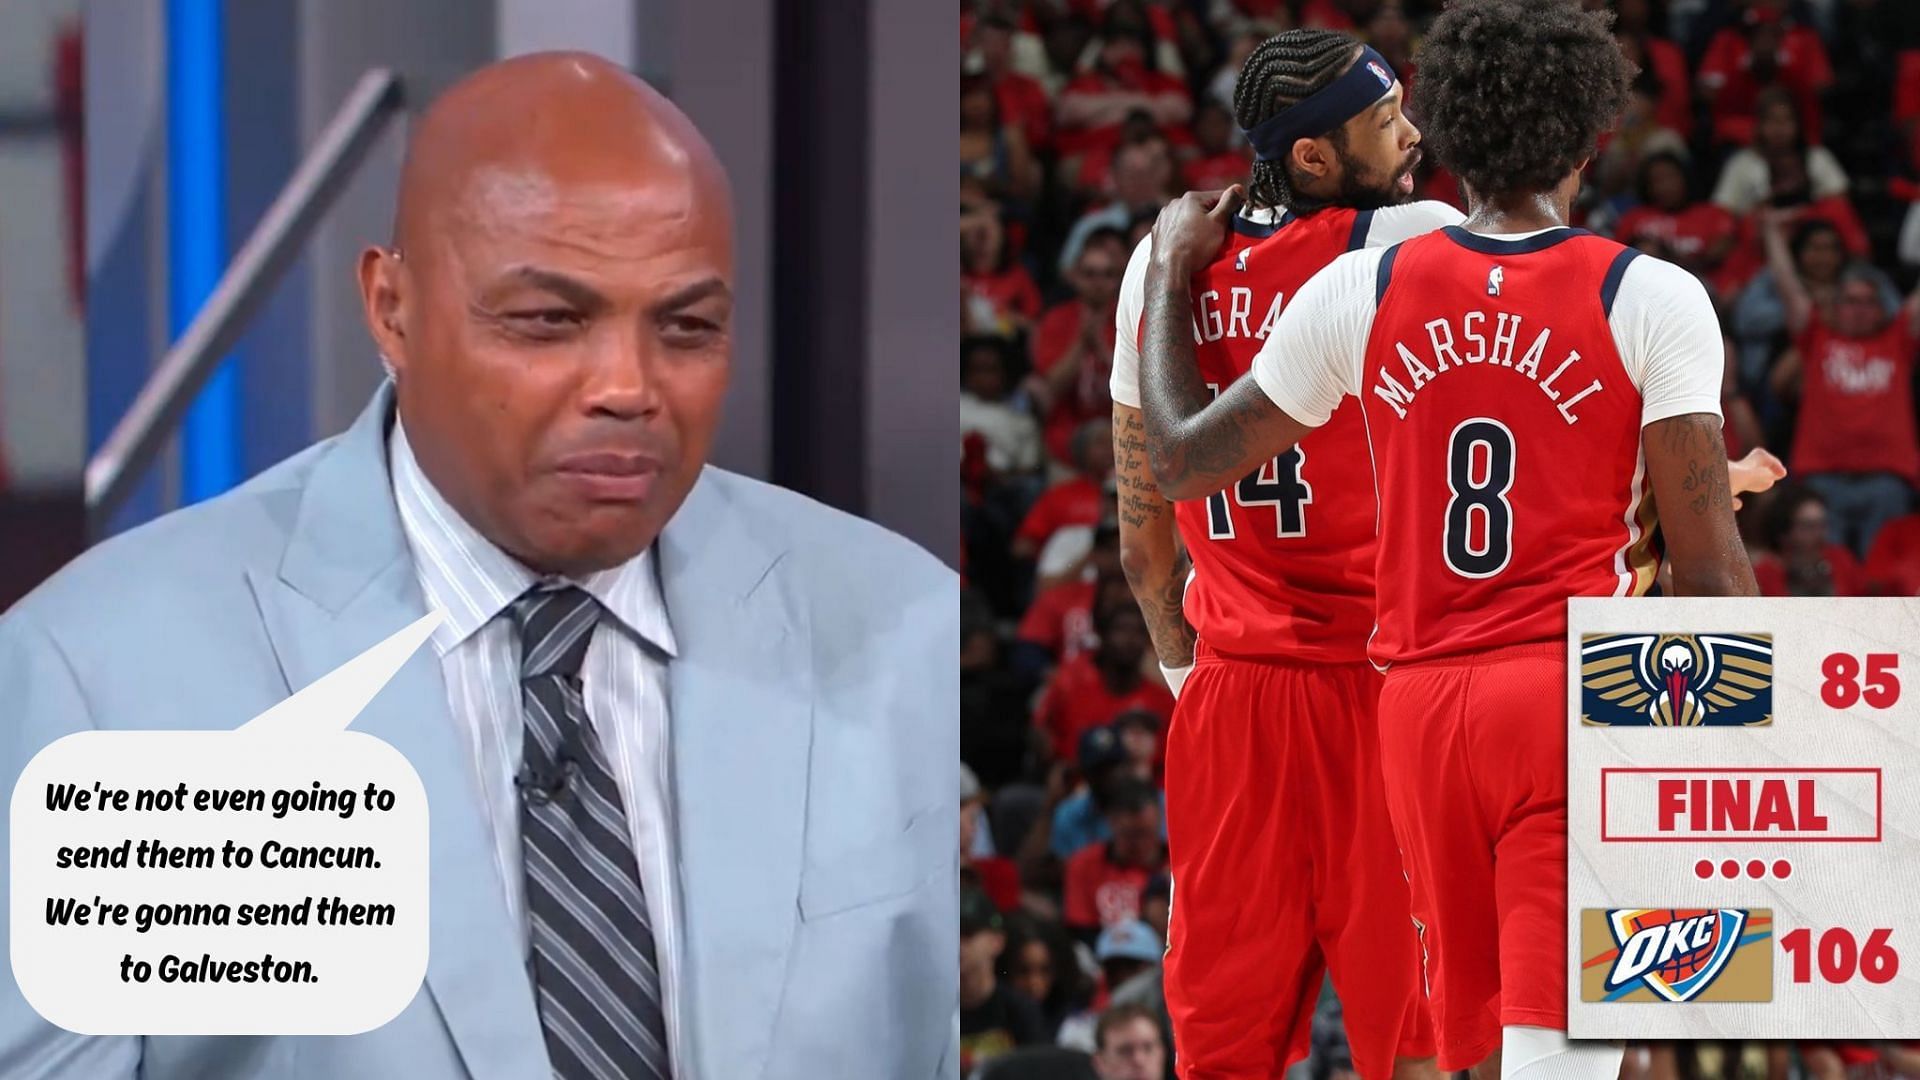 Charles Barkley says Pelicans pack up and go to Galveston, Texas 